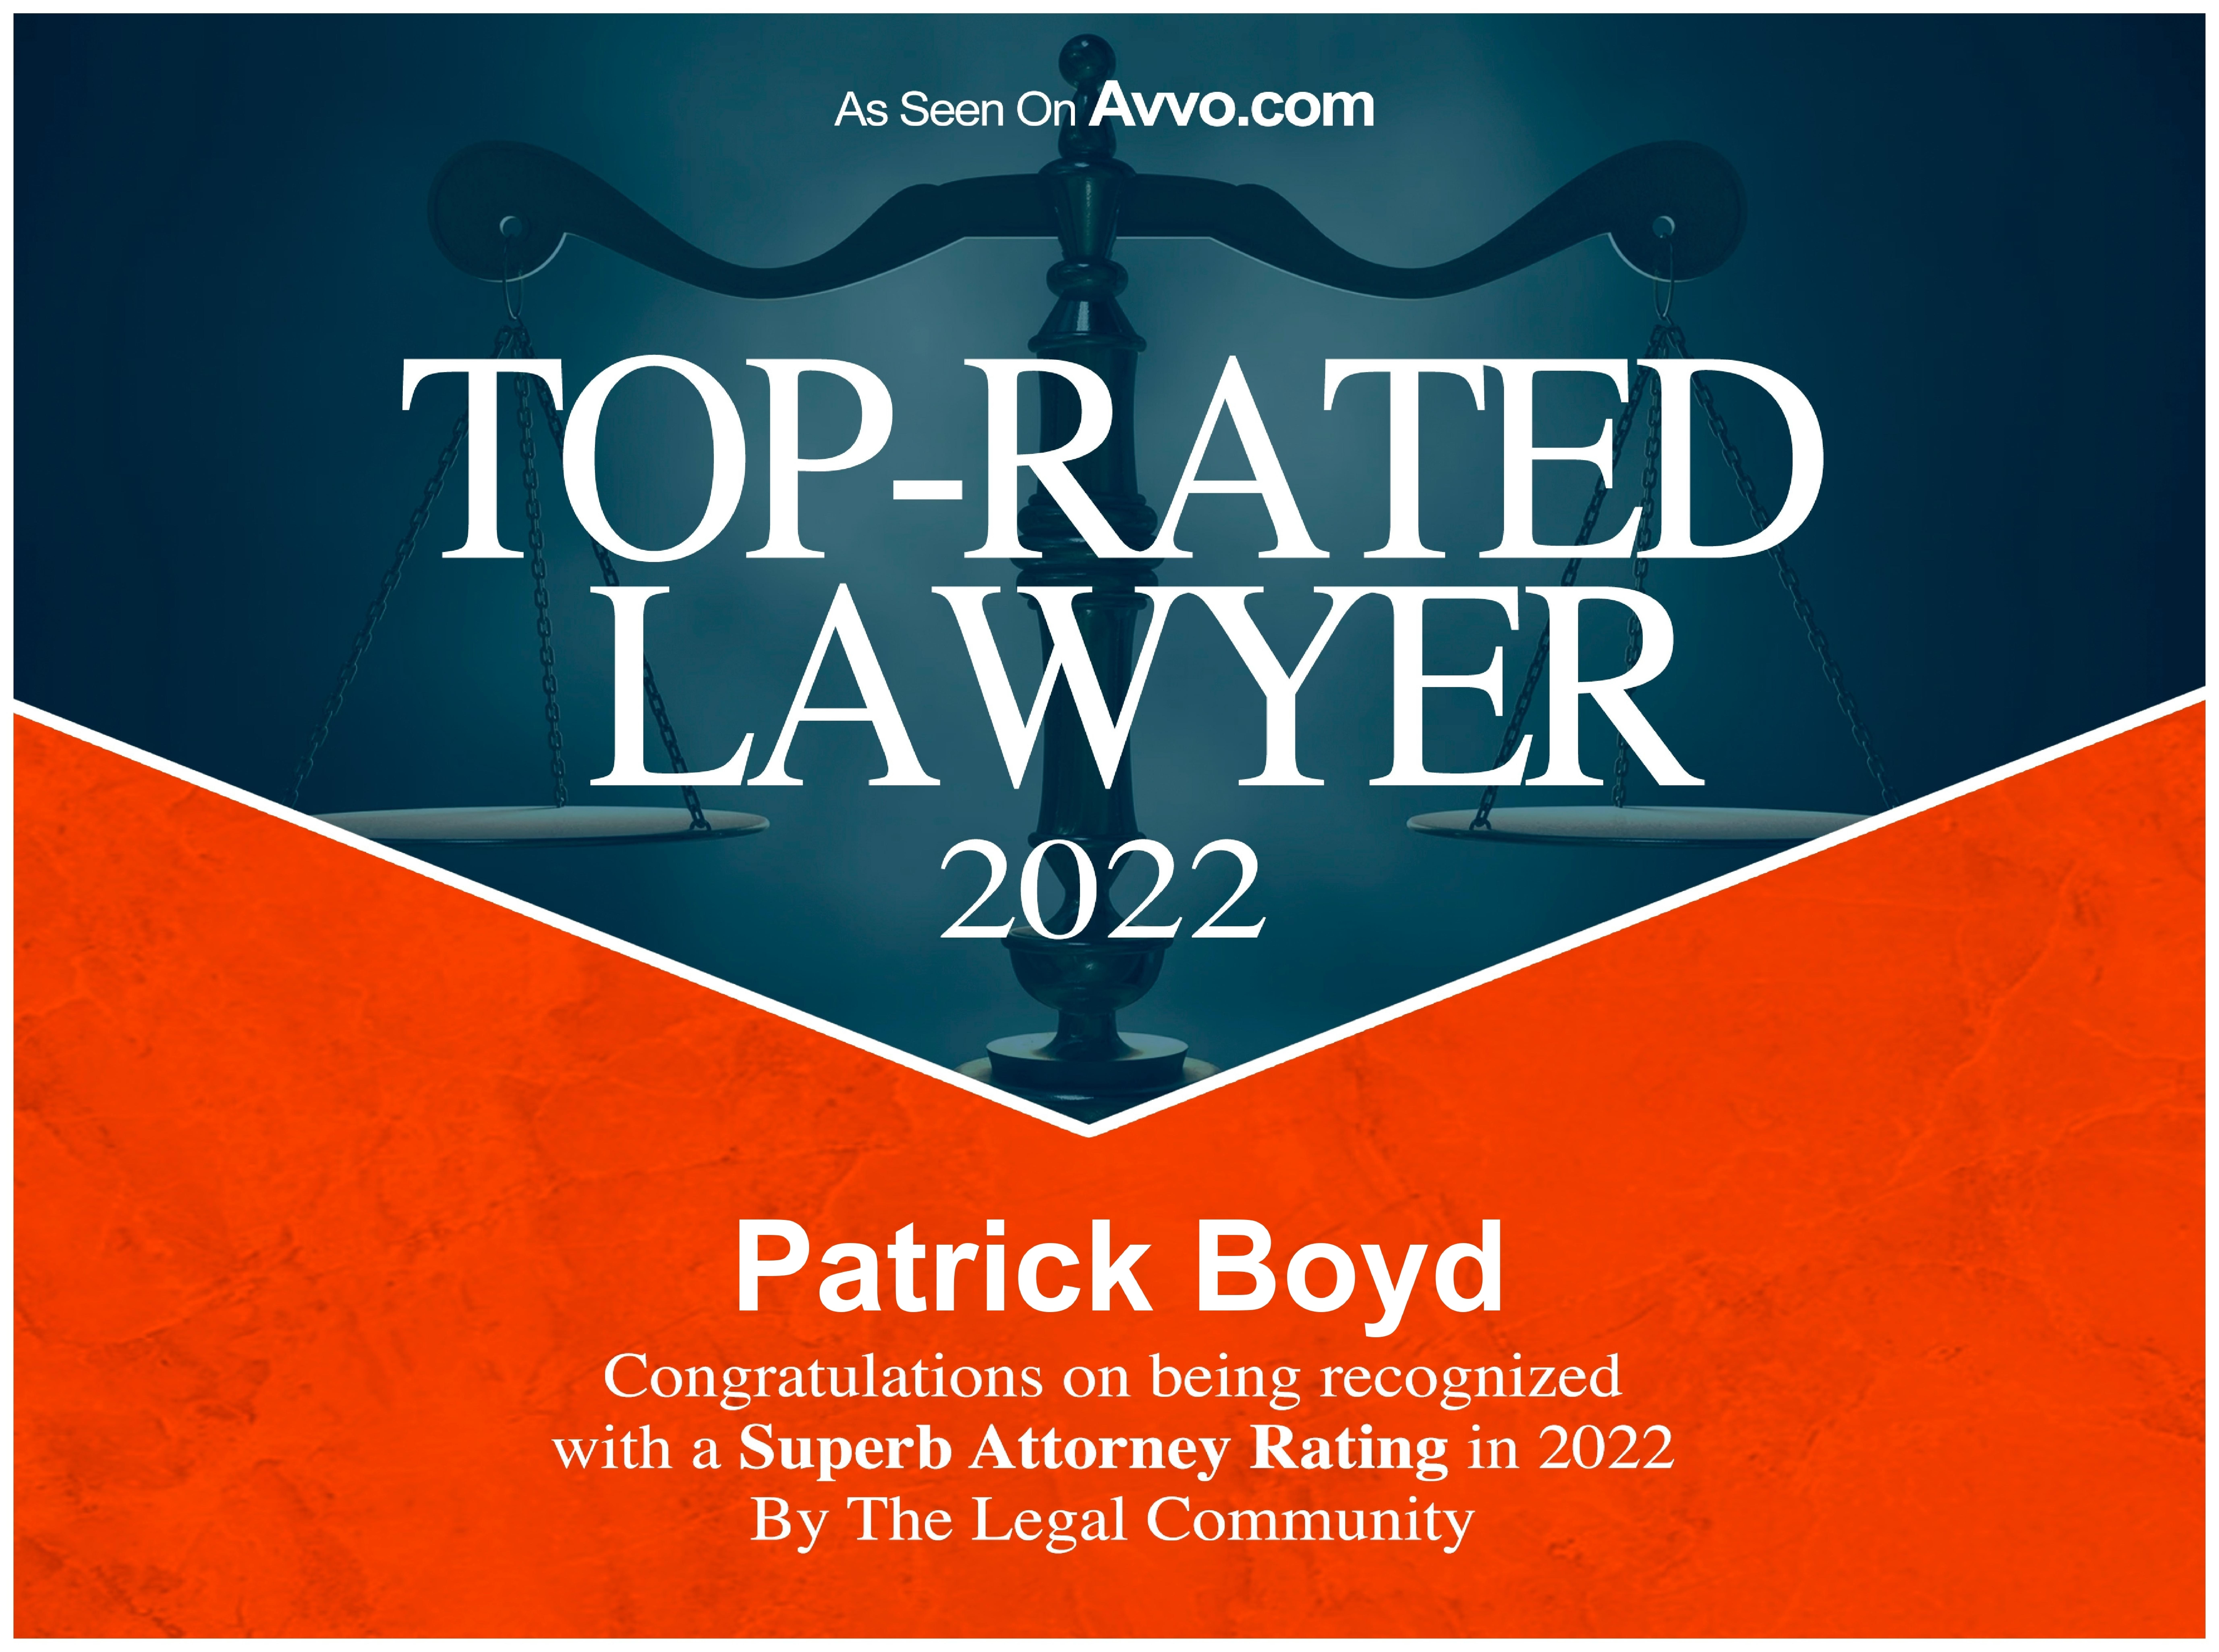 Top-Rated Lawyer 2022